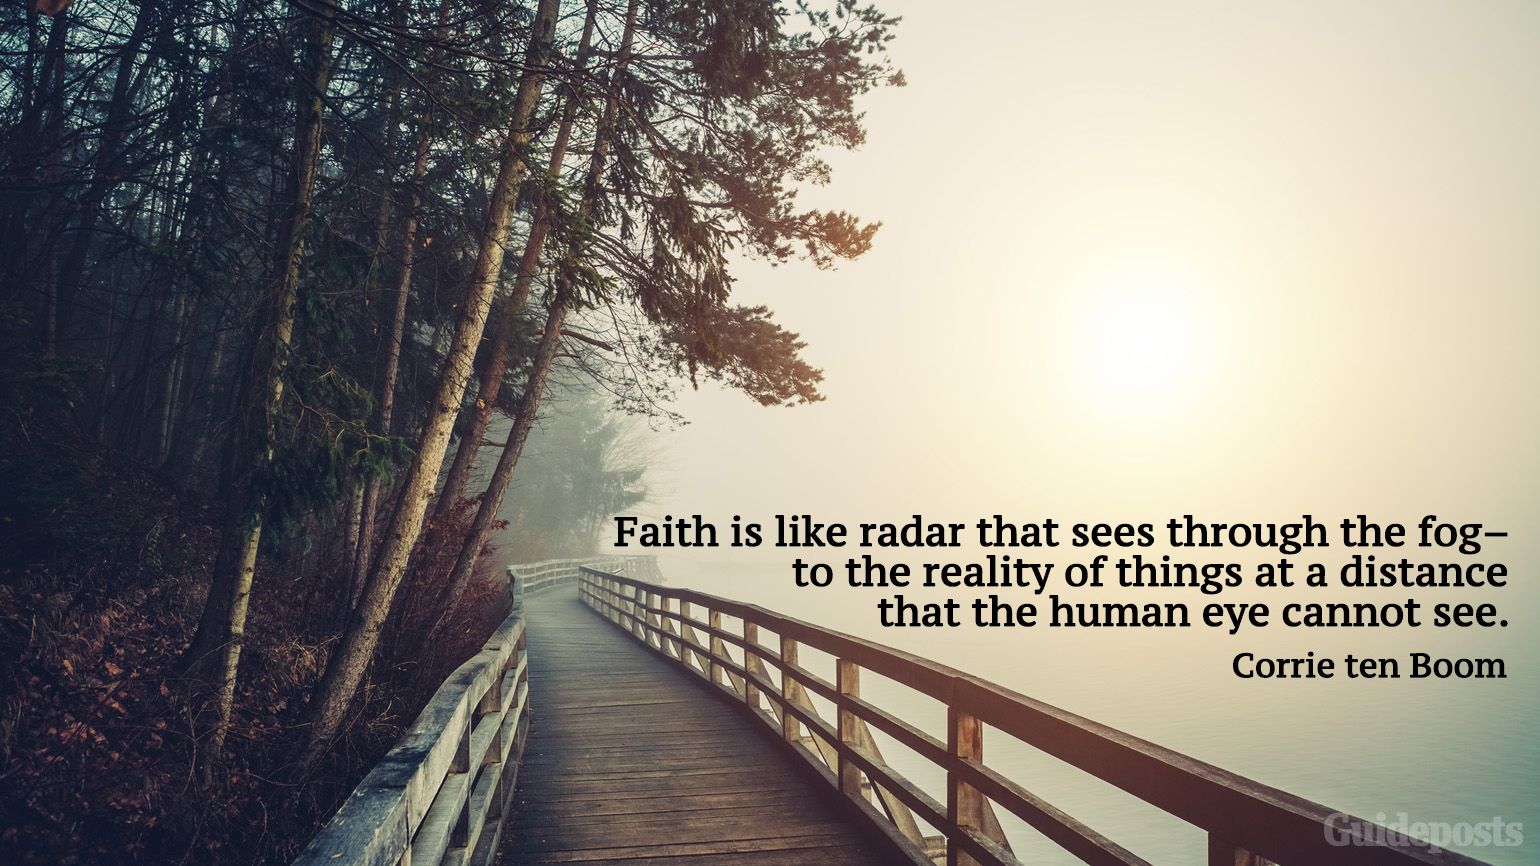 "Faith is like radar that sees through the fog—to the reality of things at a distance that the human eye cannot see." Inspiring Corrie ten Boom quotes